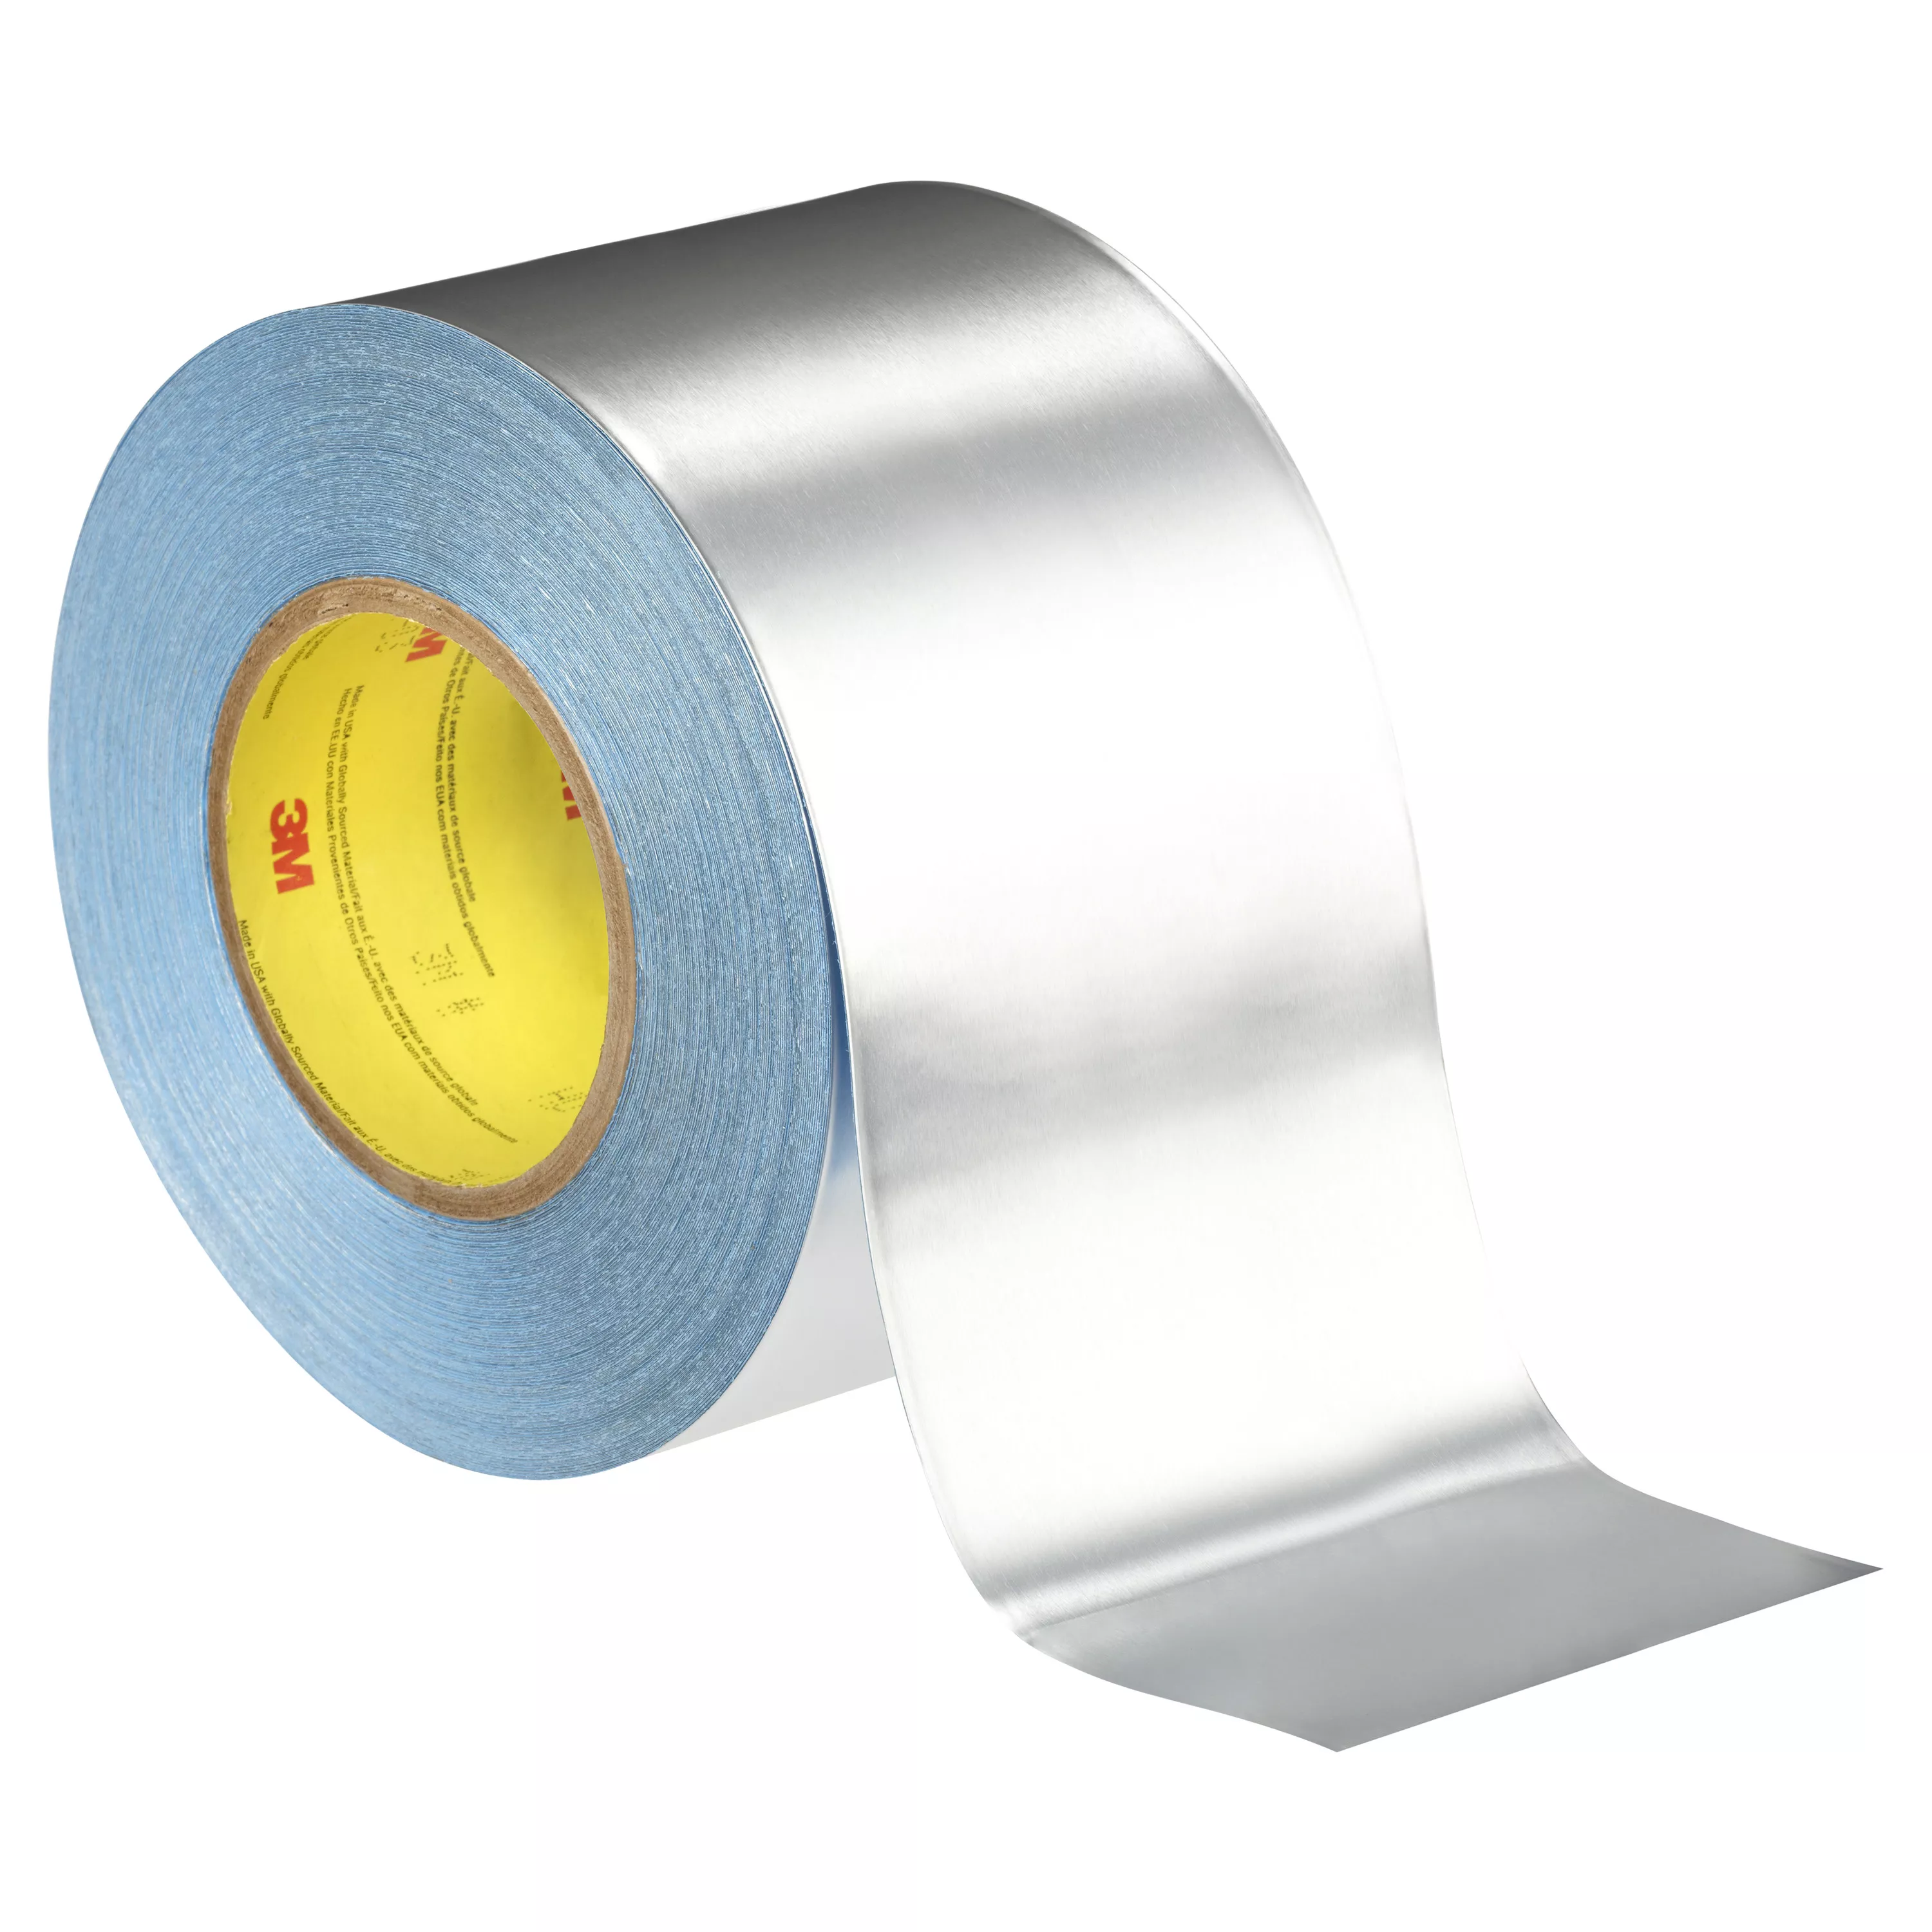 3M™ Vibration Damping Tape 436, Silver, 4 in x 36 yd, 17.5 mil, 3
Roll/Case